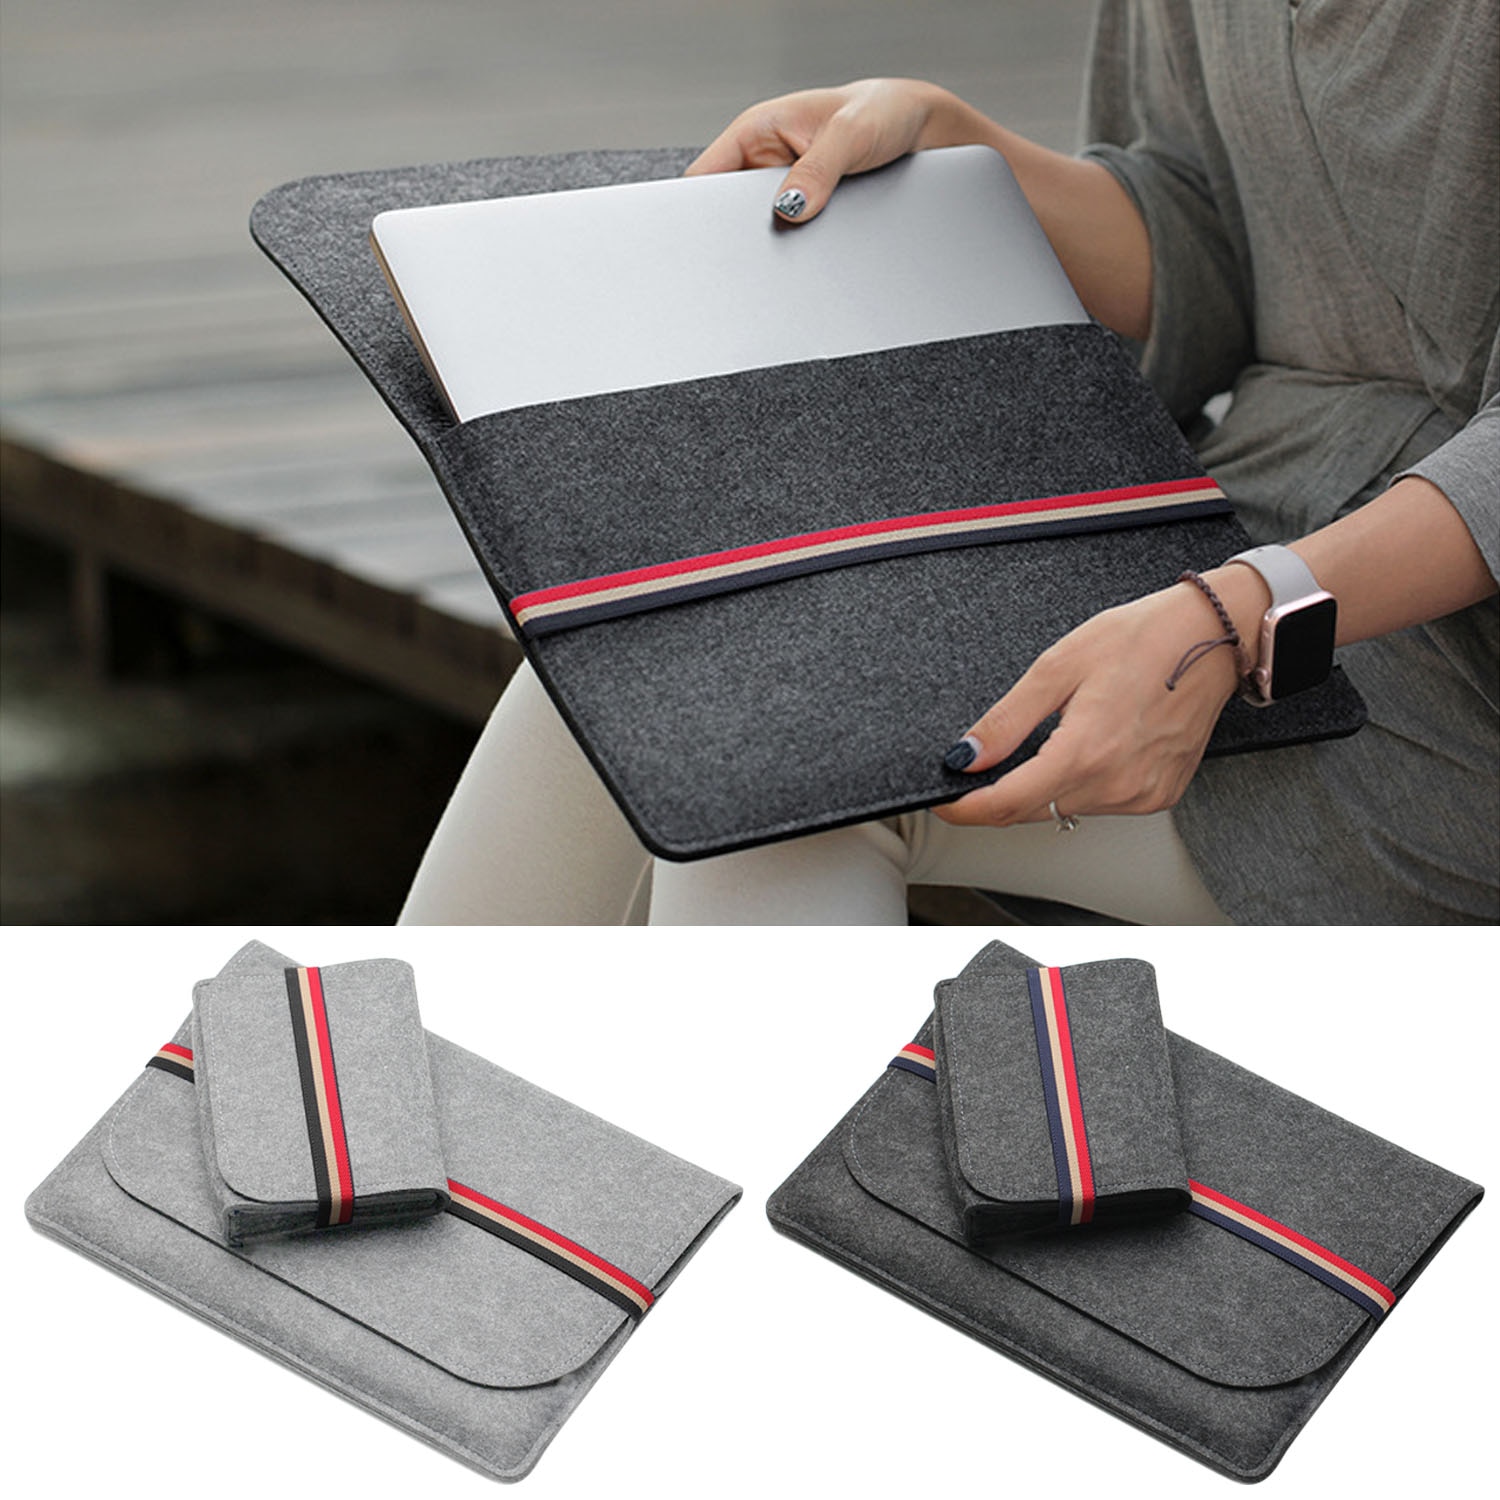 Besegad Voelde Mouw Opbergtas Cover W/Lader Pouch Case Cover Voor Apple Macbook Air Pro Lenovo Dell 11 13 15 Inch Laptop